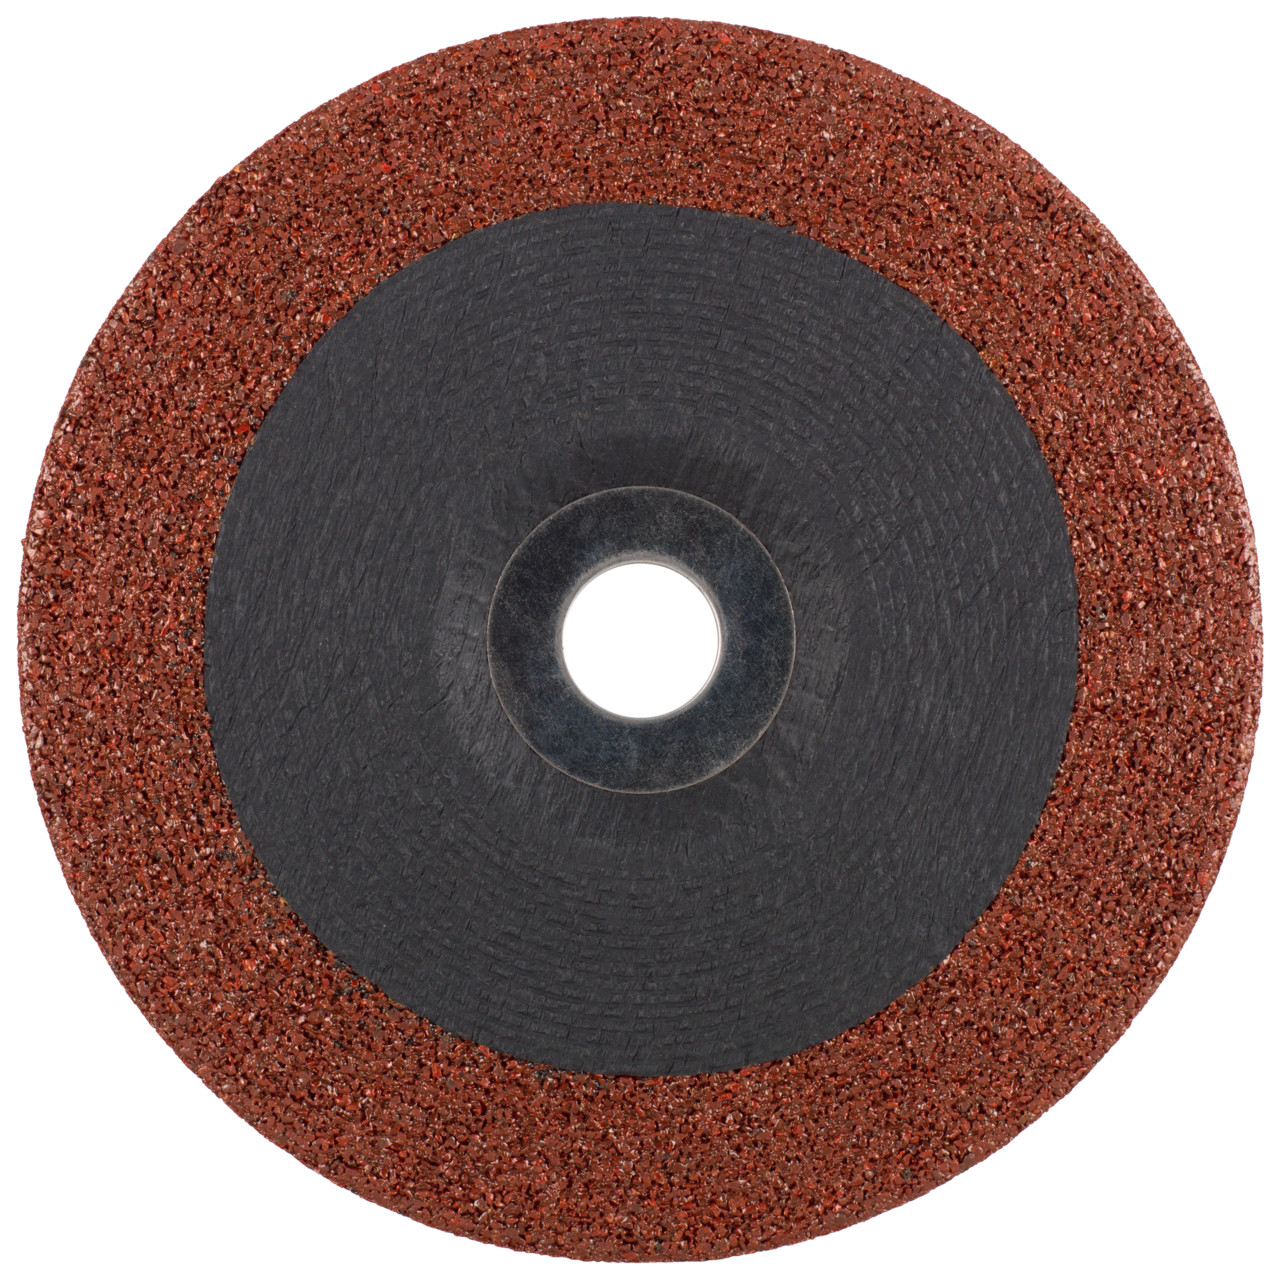 Tyrolit Roughing disc DxUxH 115x7x22.23 3in1 for steel and stainless steel and cast iron, shape: 27 - offset version, Art. 466744